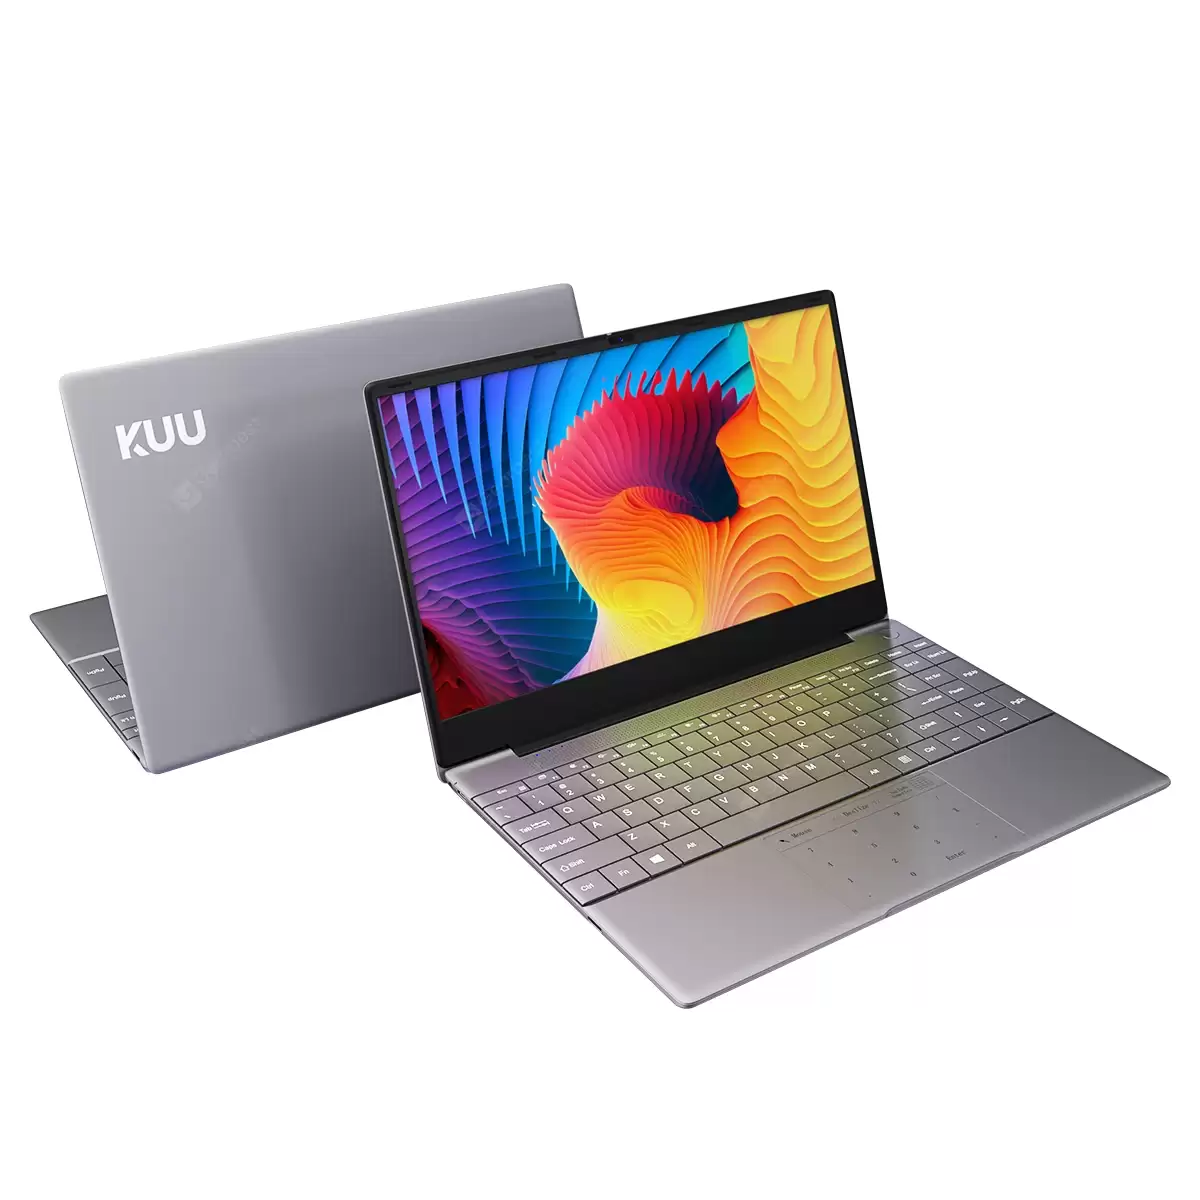 Order In Just $428.99 Kuu K2s Intel Celeron J4115 Processor 14.1-inch Ips Screen All Metal Shell Office Notebook 8gb Ram Windows 10 256gb/512gb Ssd - 256gb China - Gray 512g Spain At Gearbest With This Coupon